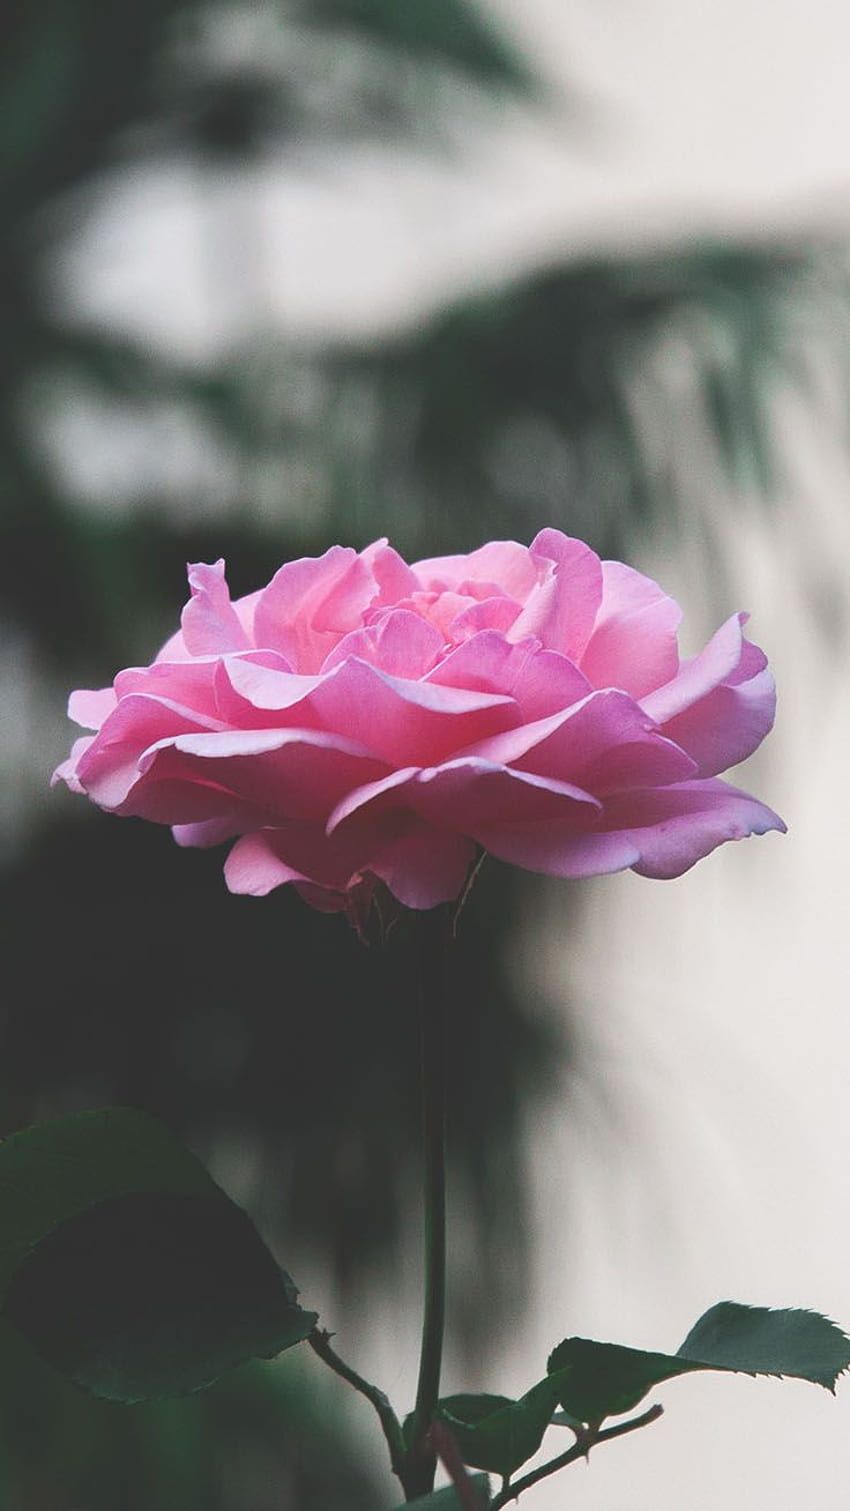 A pink rose in the garden - Roses